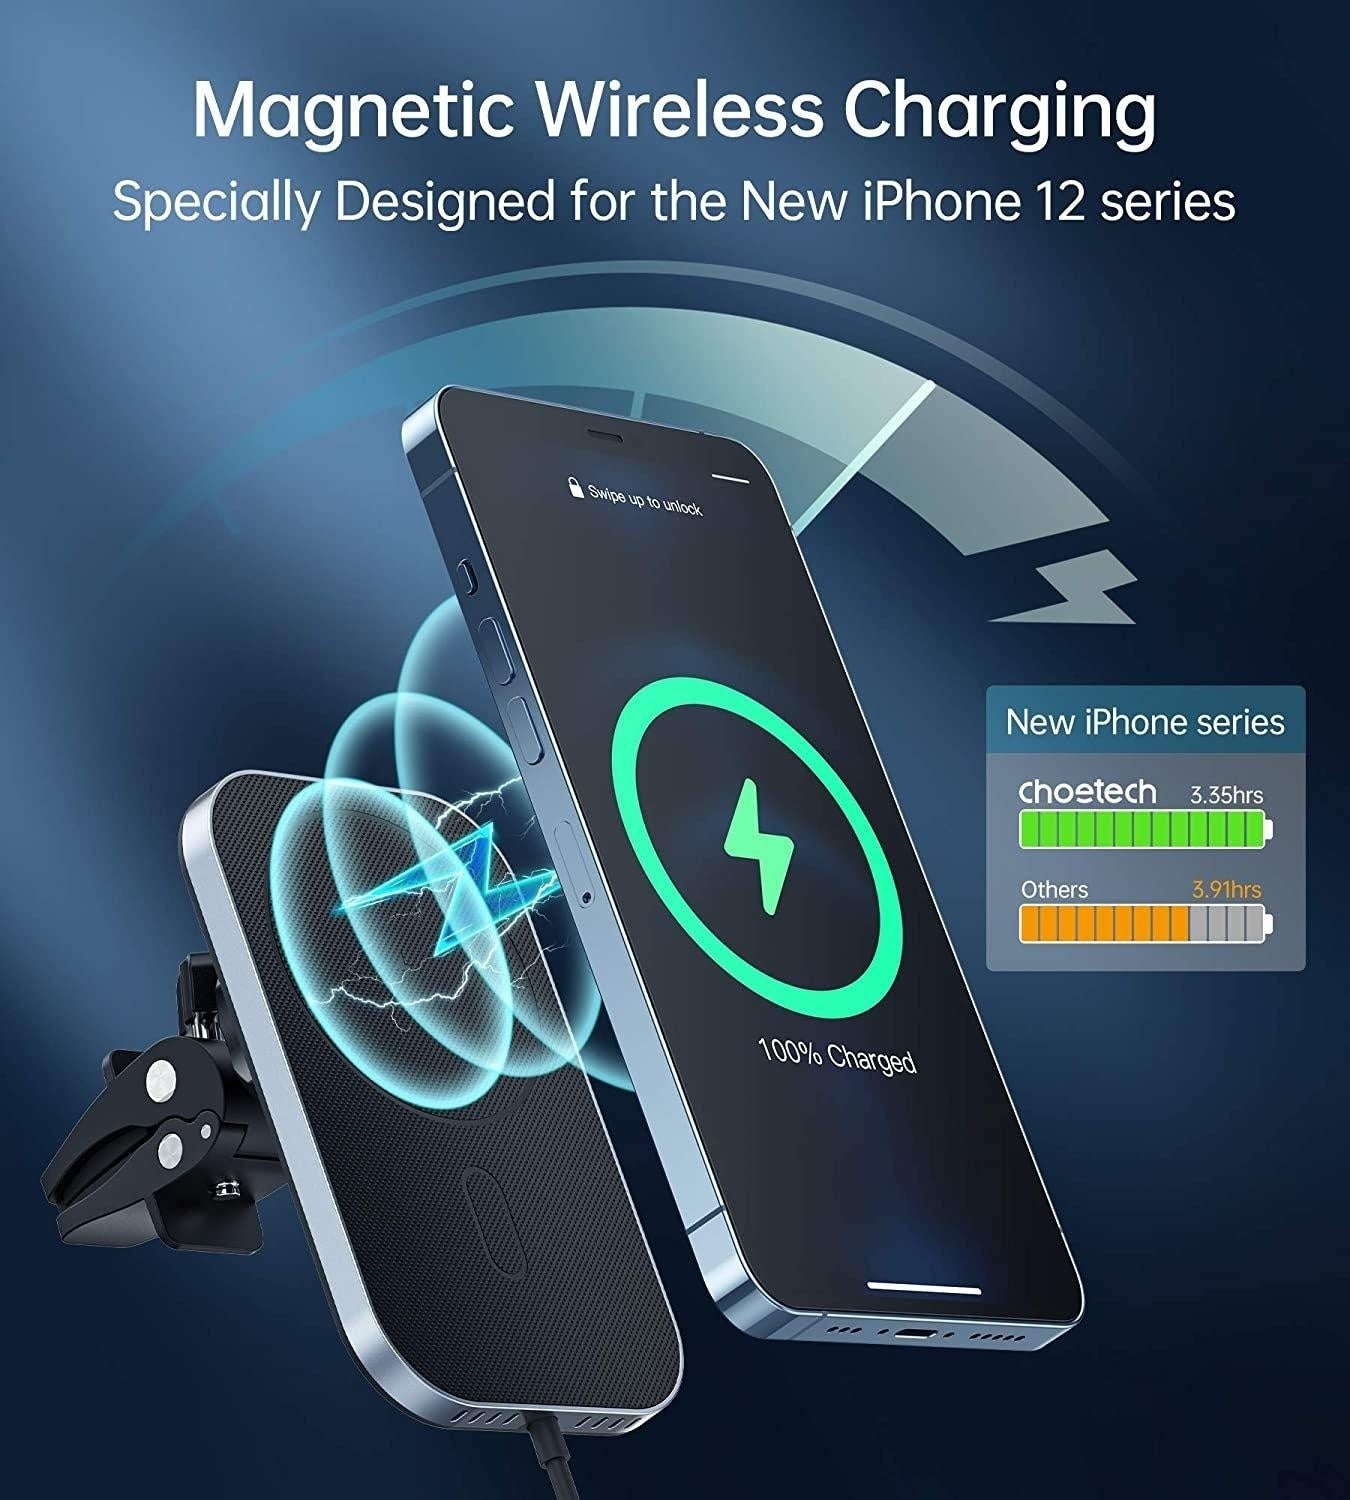 CHOETECH T200F-301 15W MagLeap Magnetic Wireless Car Charger Holder with 1.5M Cable Deals499